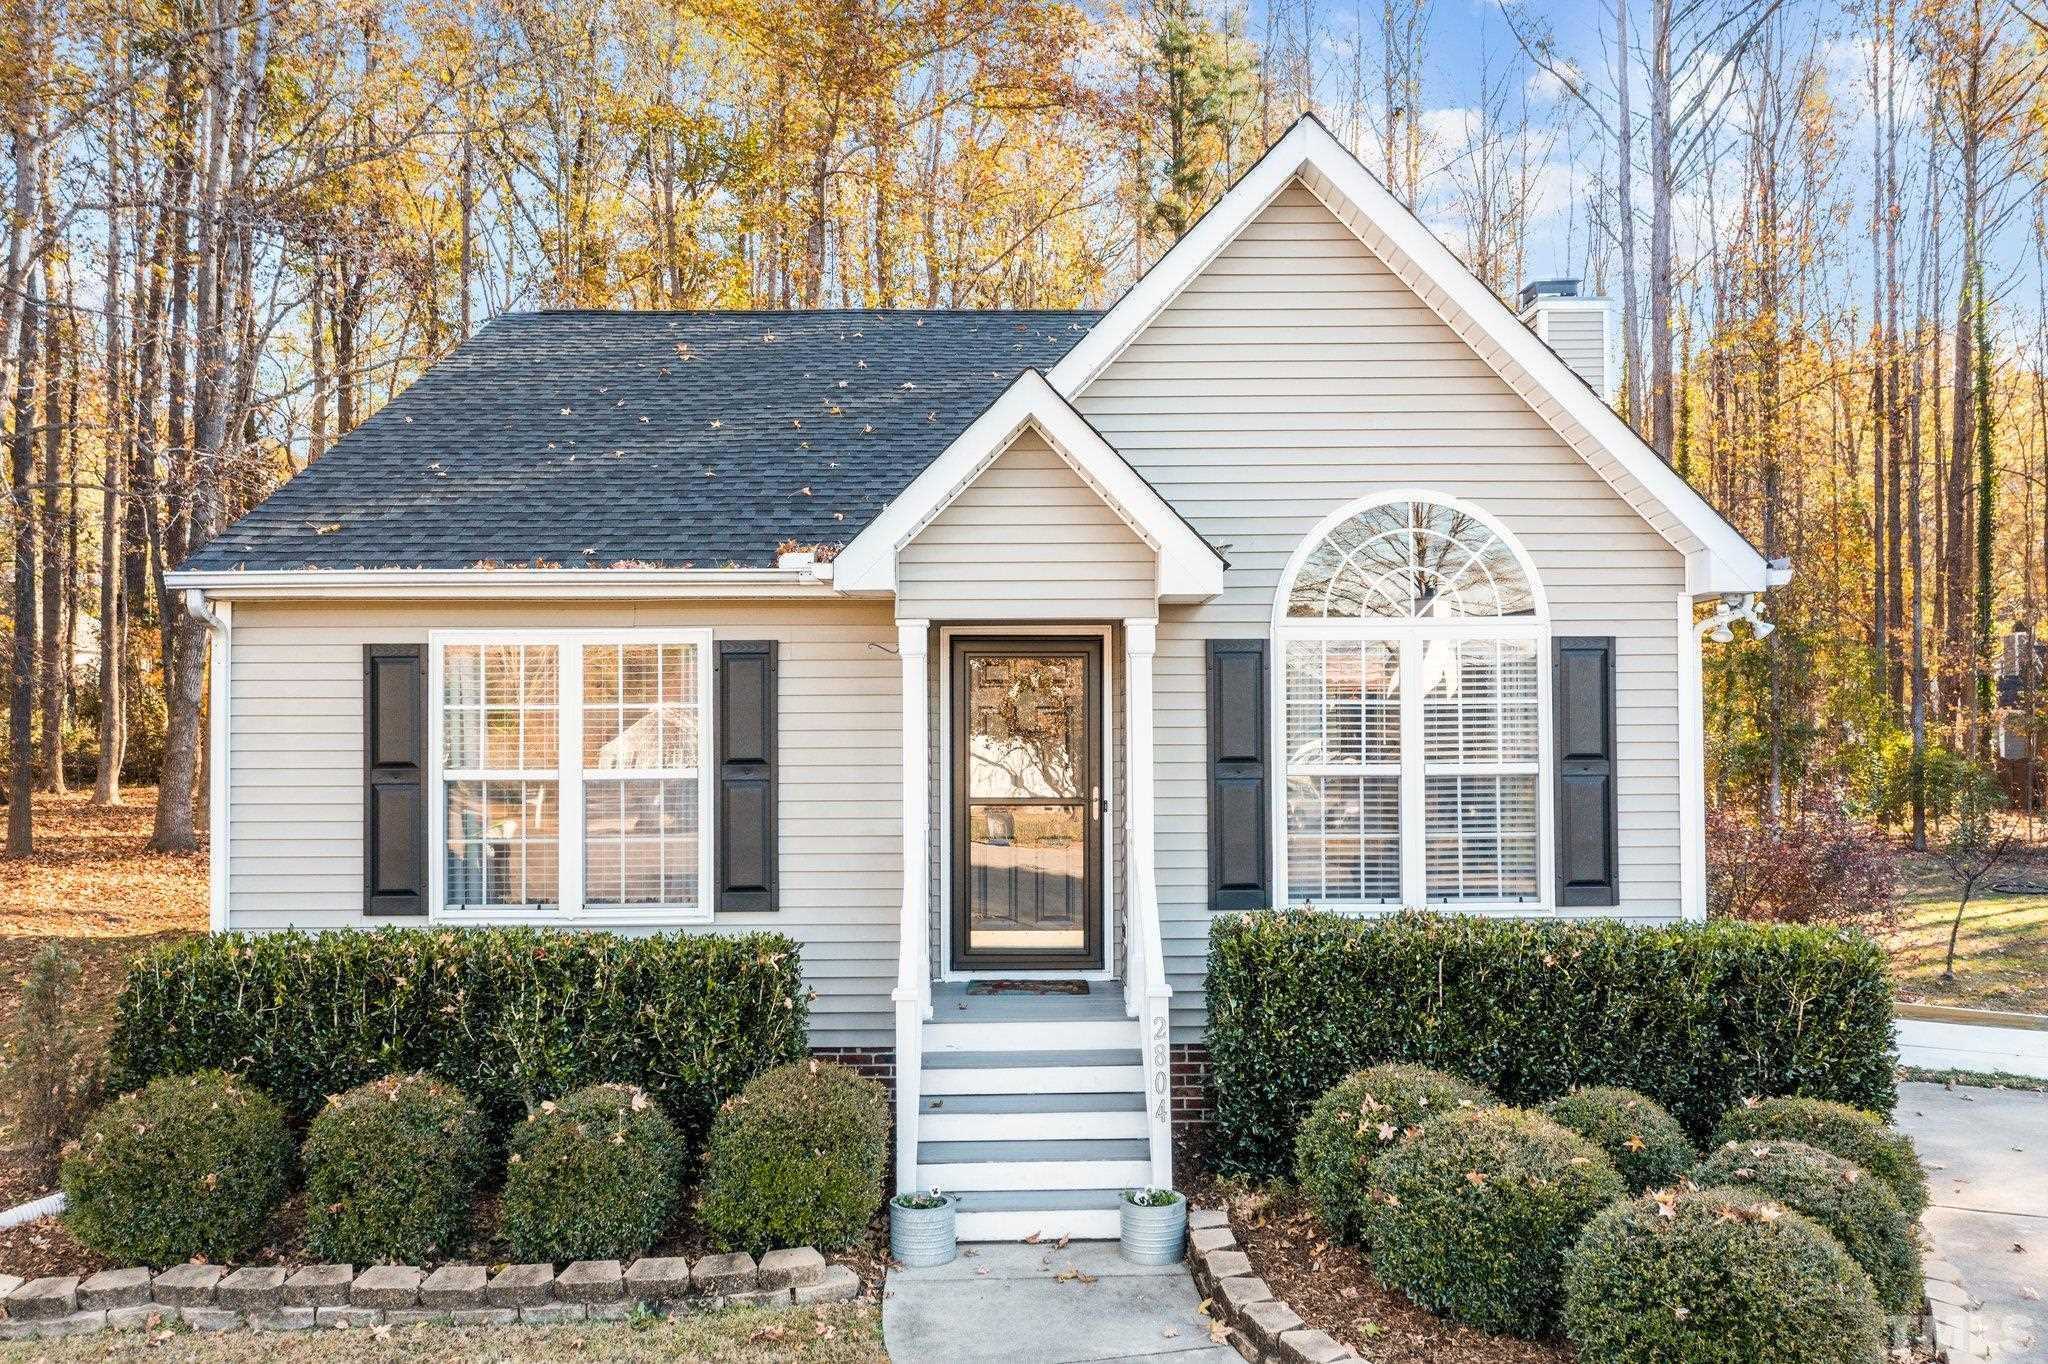 $297,000 - 3Br/2Ba -  for Sale in Amherst, Apex